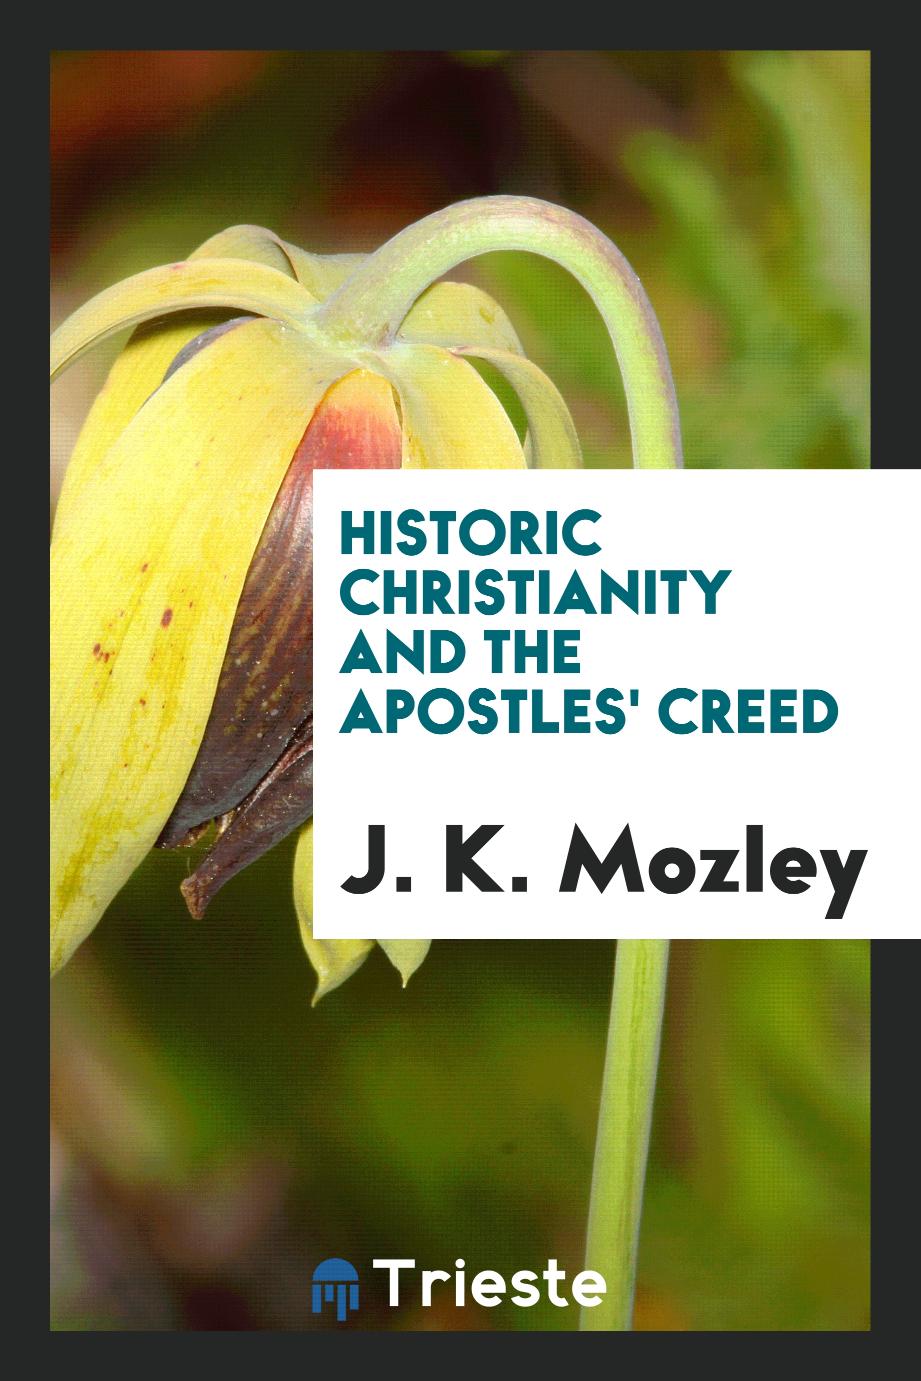 Historic Christianity and the Apostles' creed